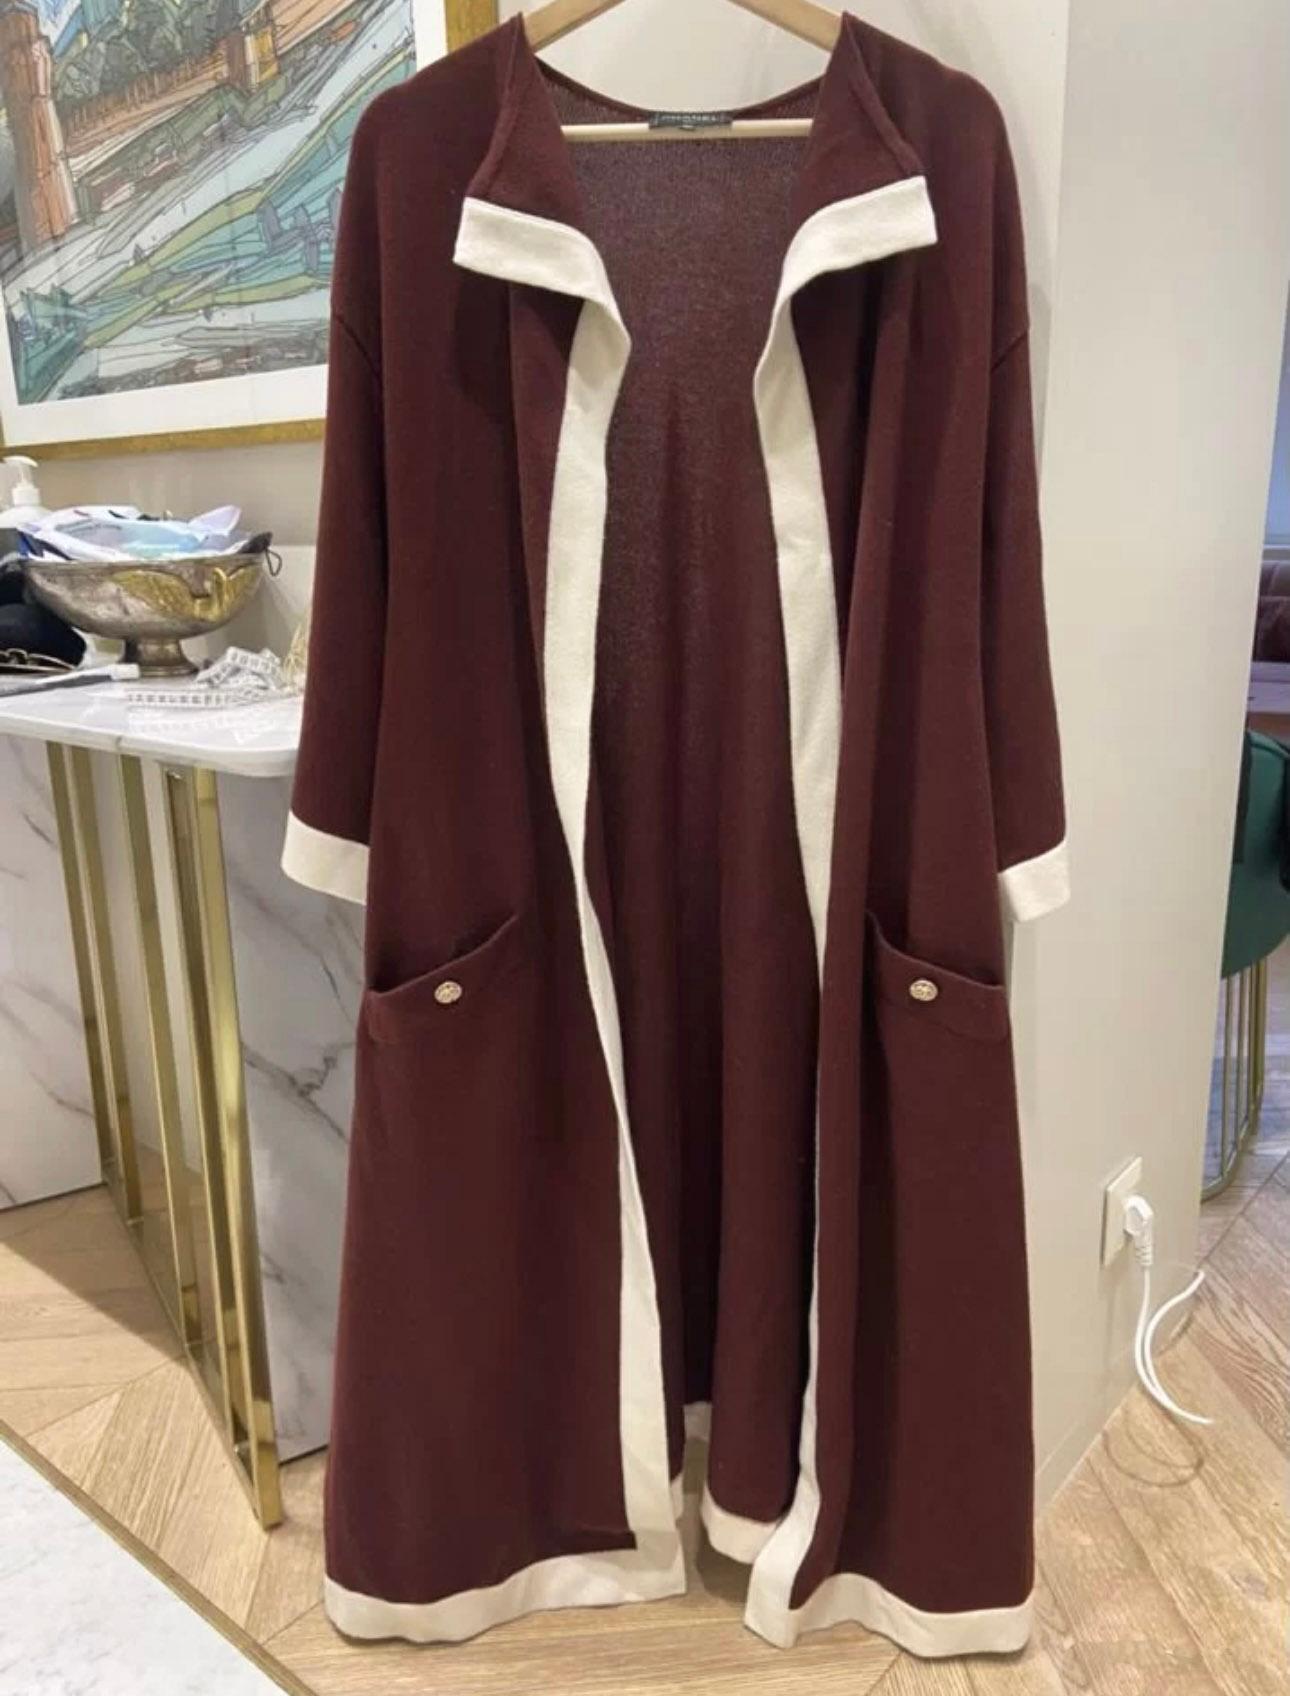 Chanel deep burgundy cashmere cardi coat with CC logo buttons: laconic and elegant silhouette in combo with finest material.
Size mark 34 FR. Condition is pristine.